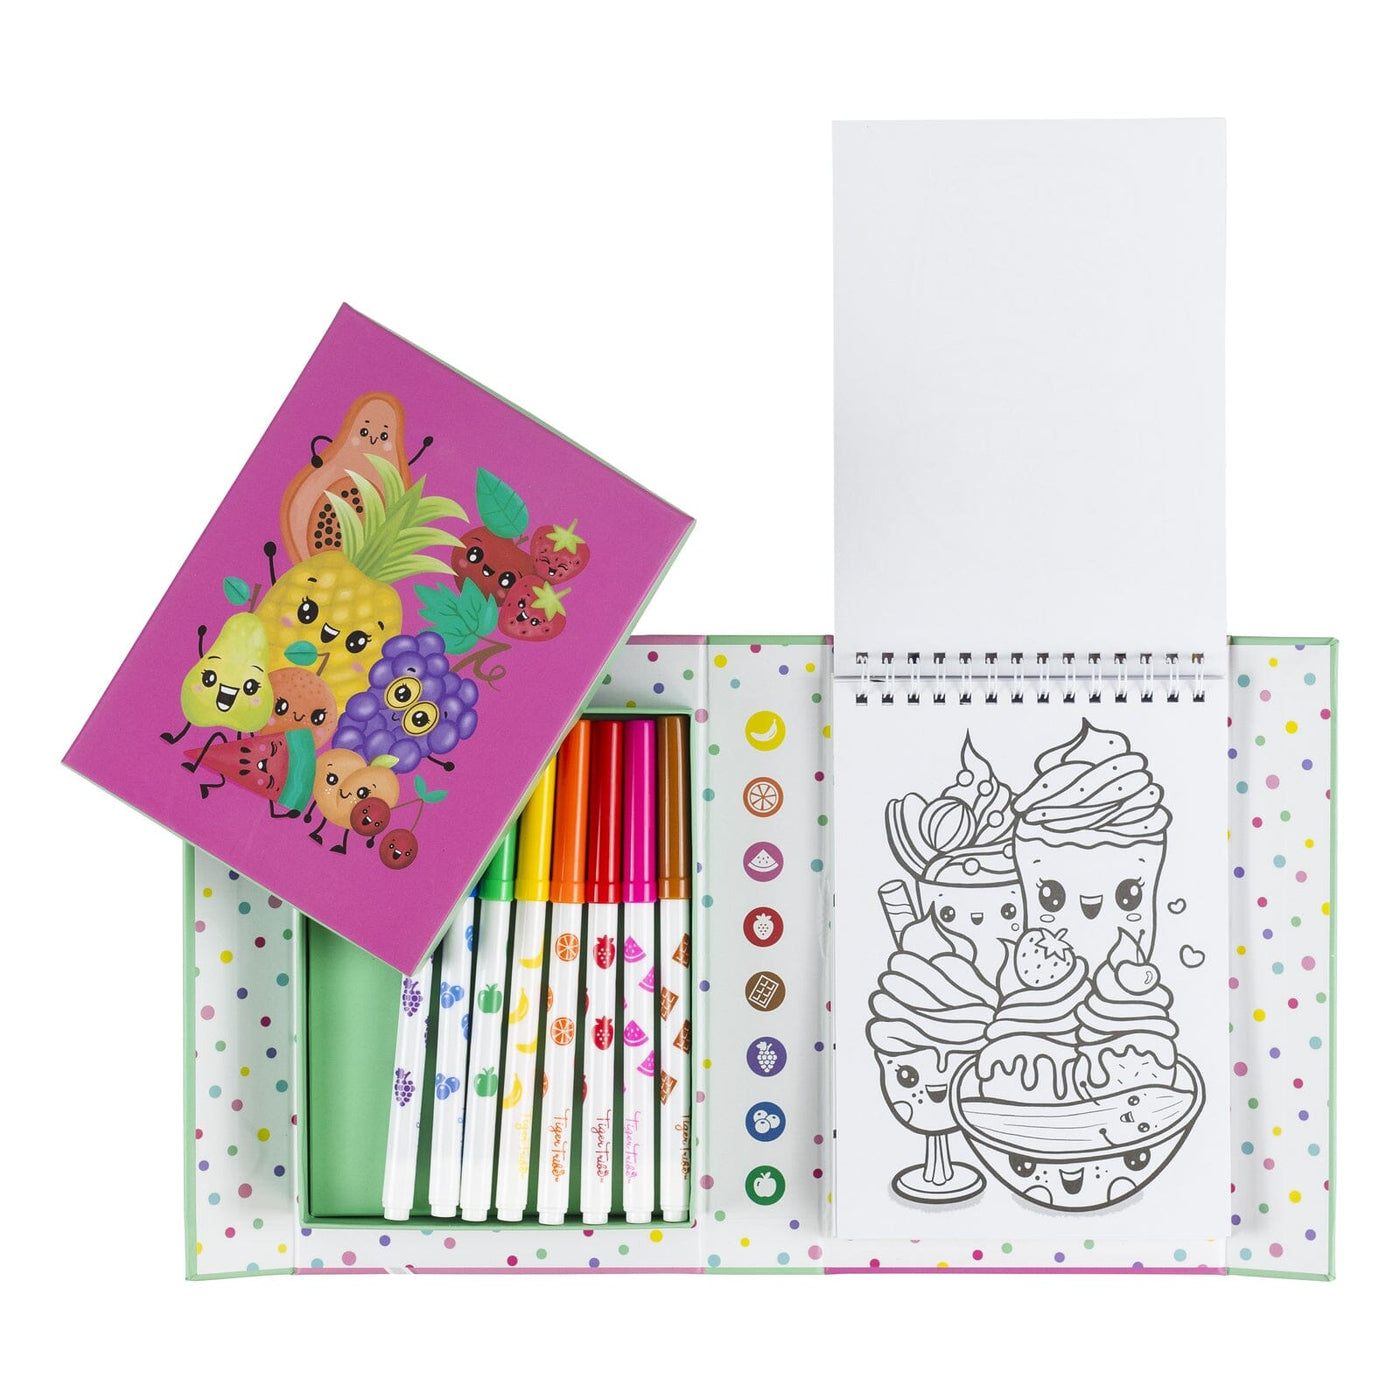 Tiger Tribe Scented Colouring - Fruity Cutie Activity & Craft Tiger Tribe 